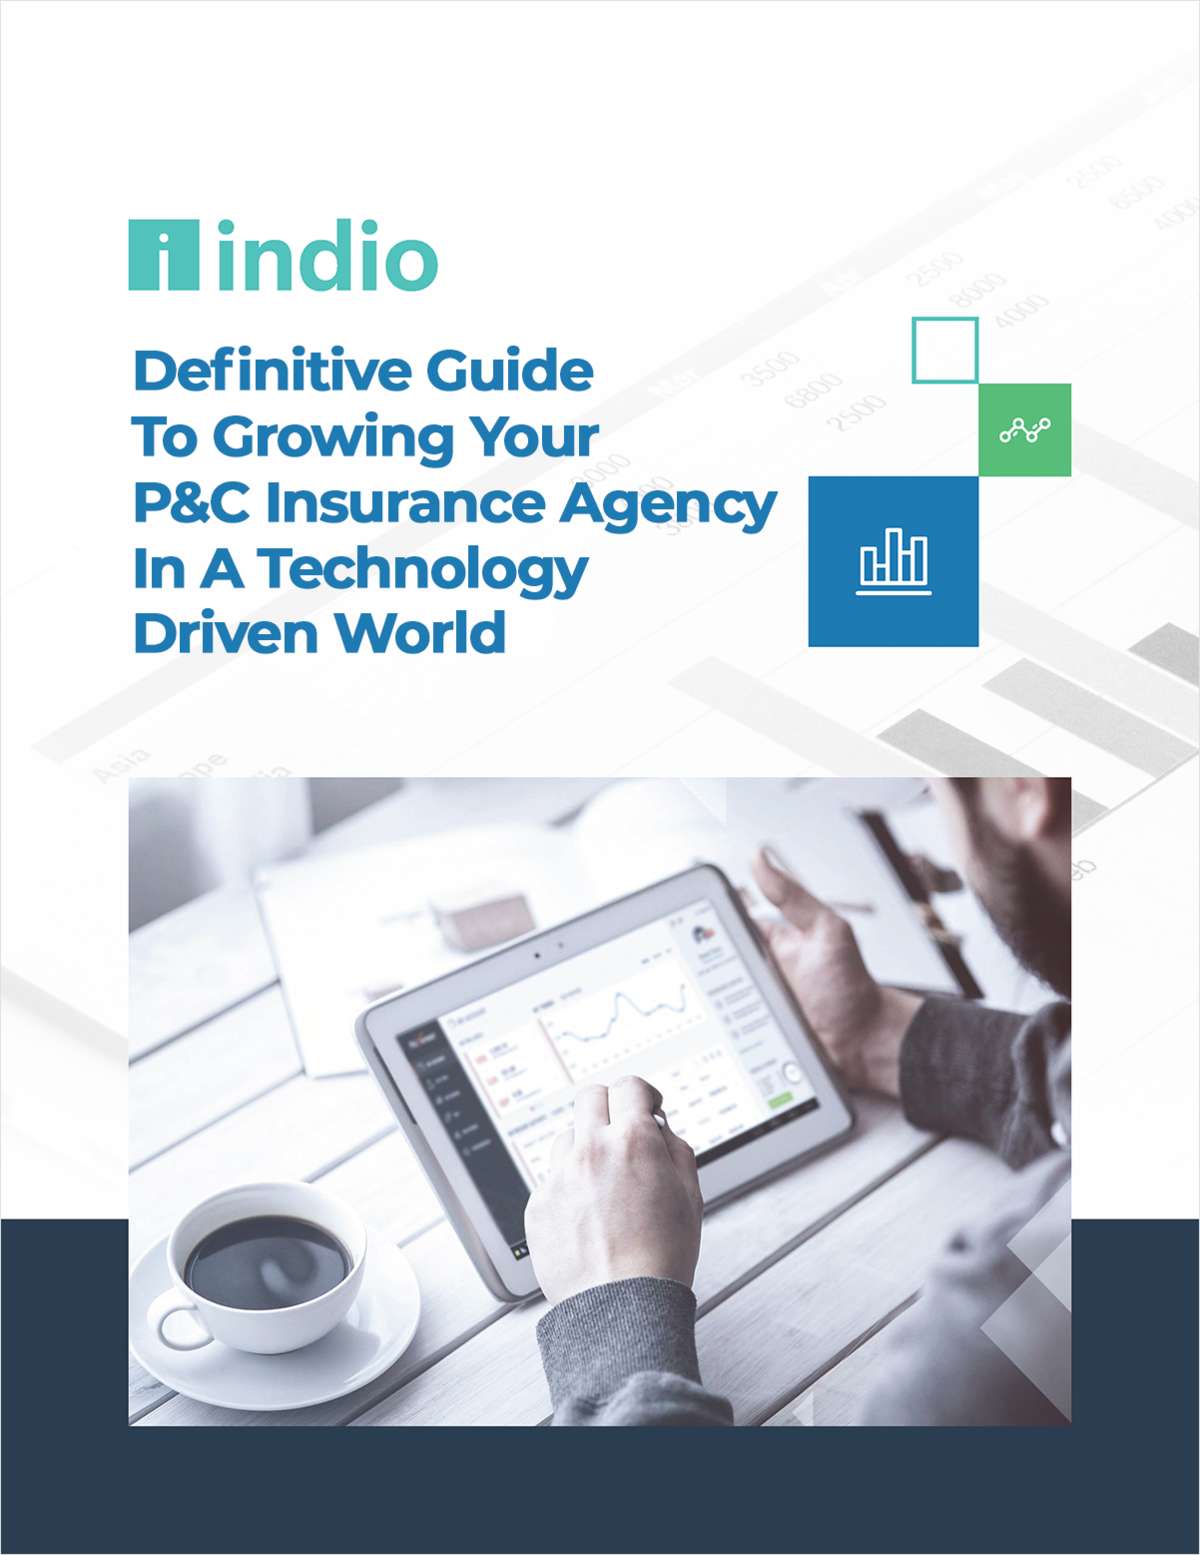 Definitive Guide To Growing Your P&C Insurance Agency In A Technology Driven World